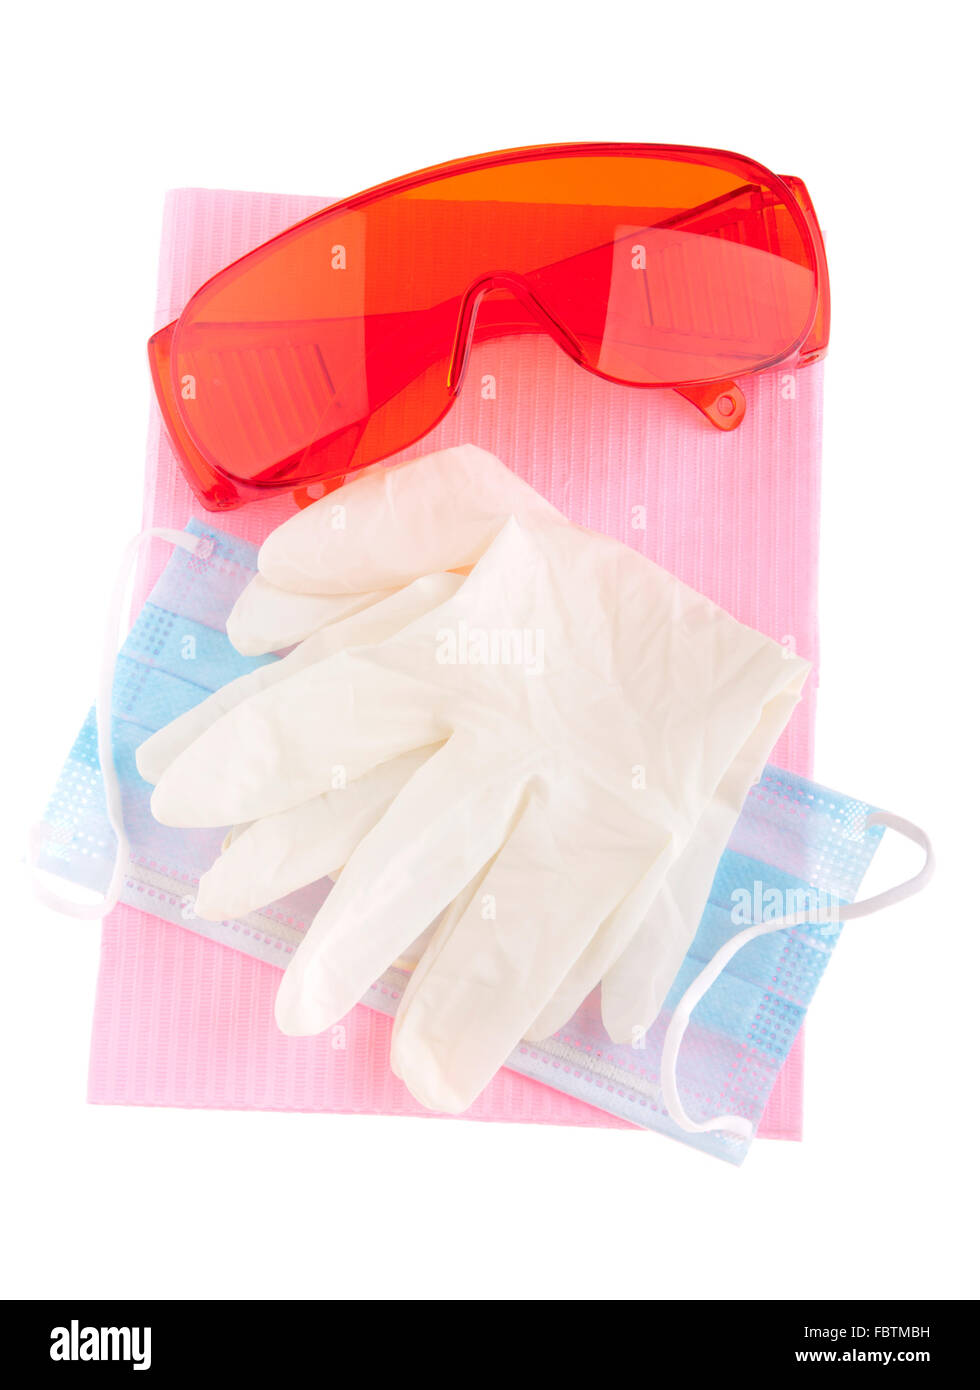 health and safety equipment (glasses Stock Photo